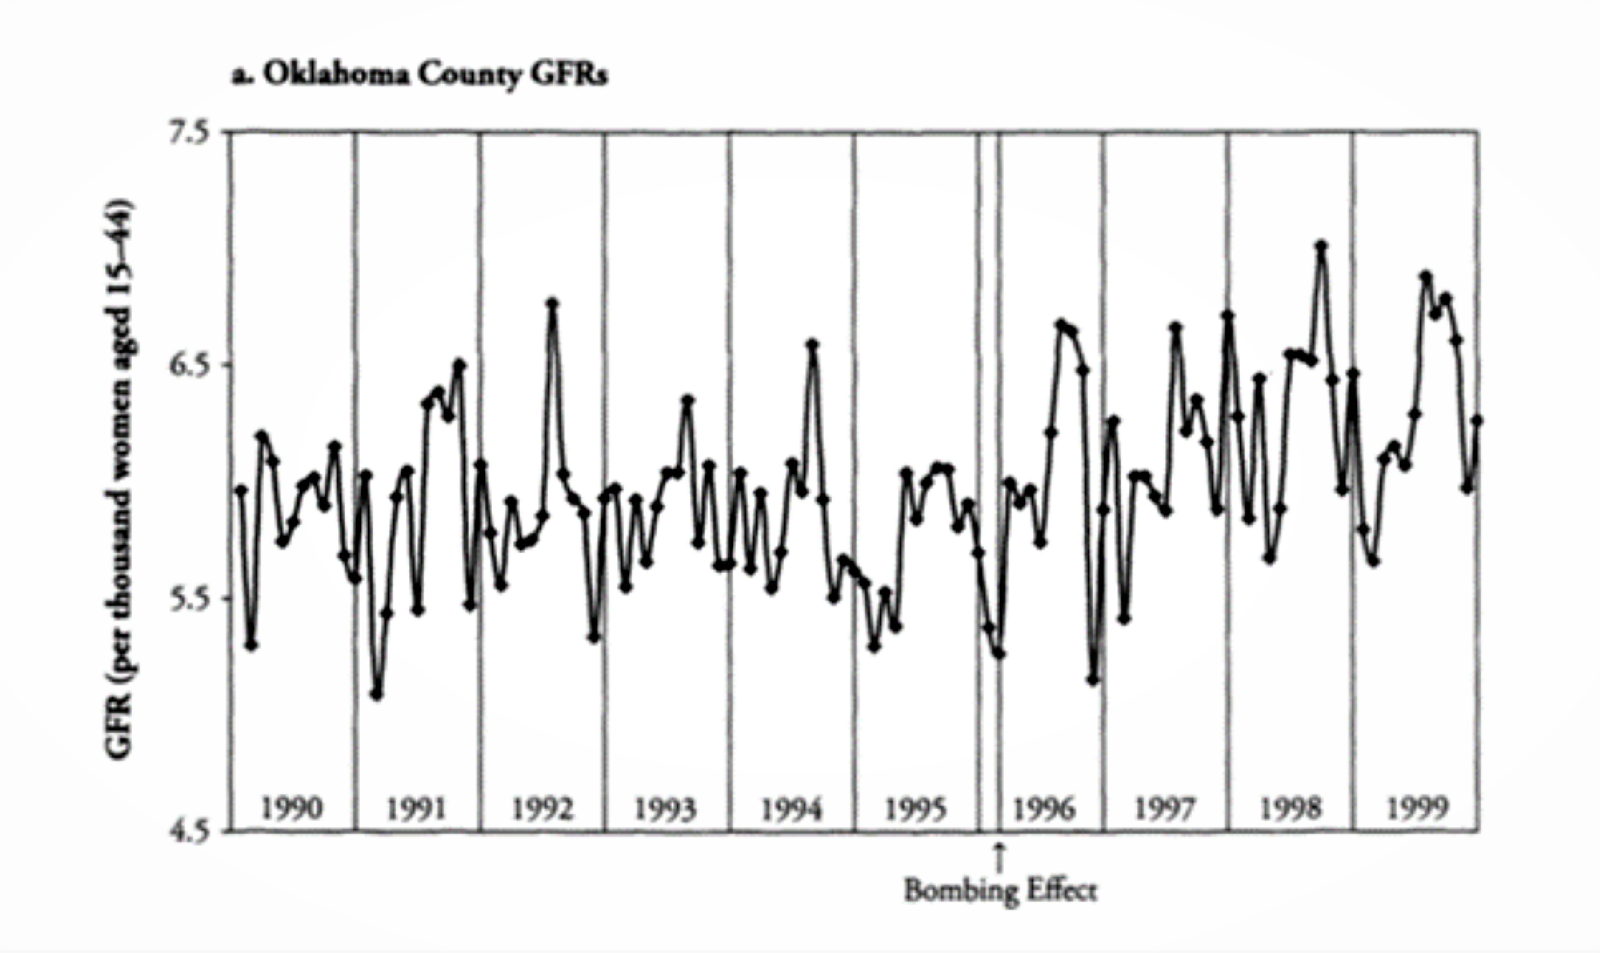 Oklahoma county, Birth rate over time (Source: Rodgers et al., 2005)